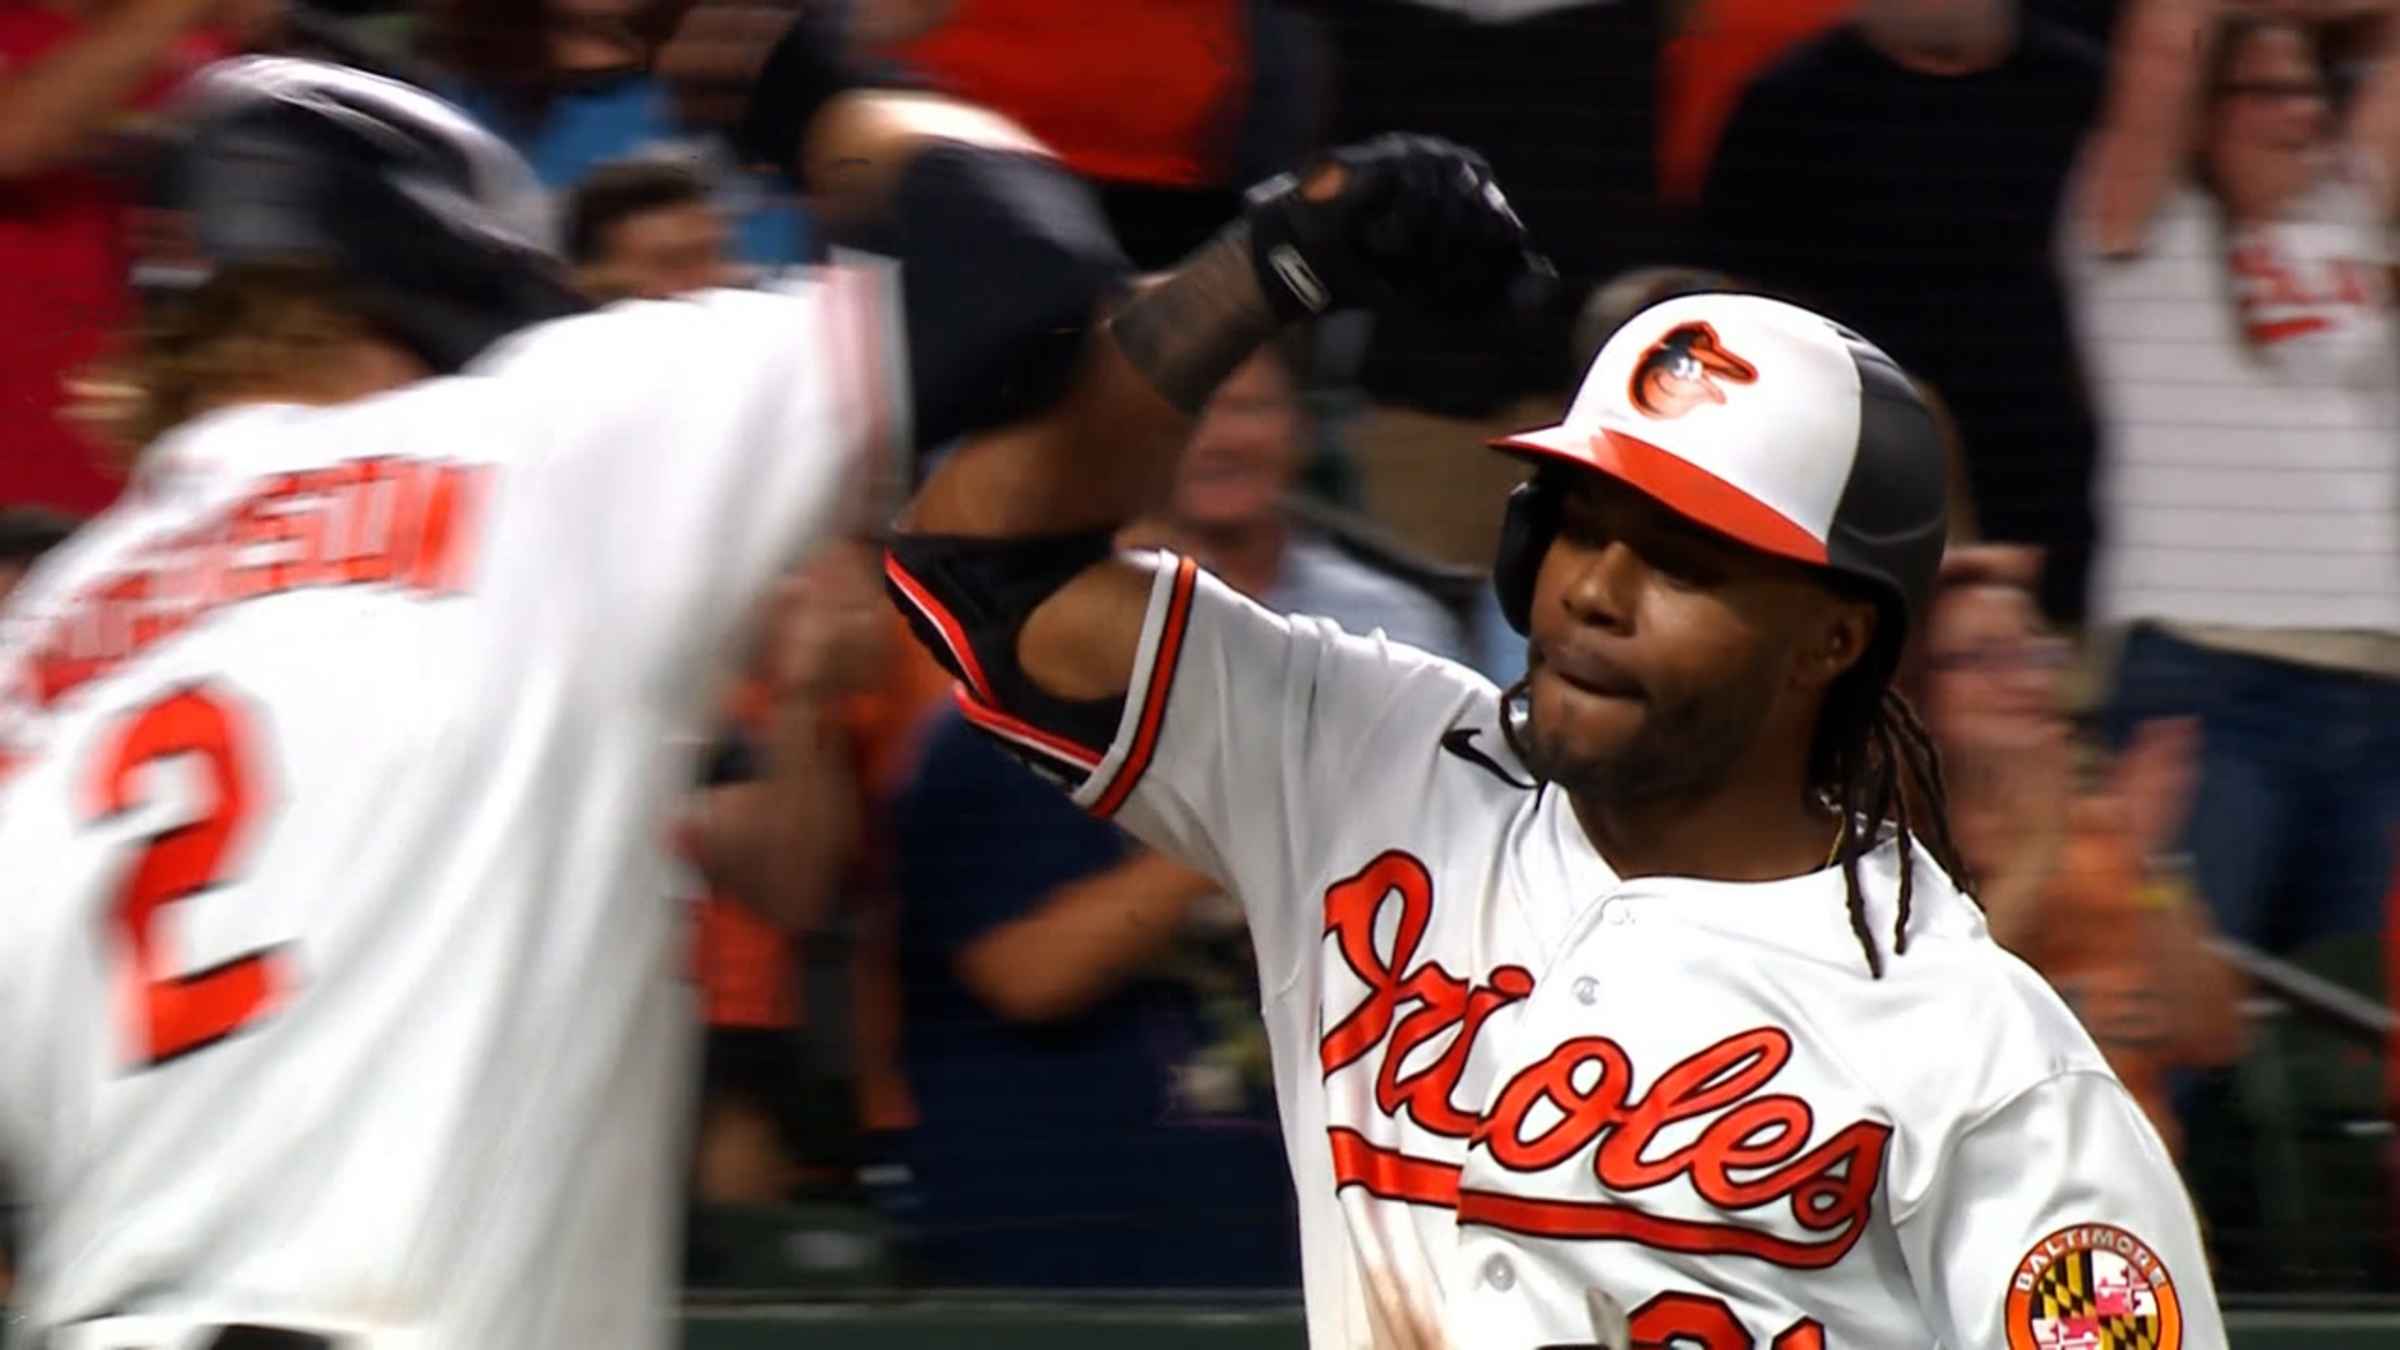 Cedric Mullins hits grand slam in 5th inning to lift Orioles to 11